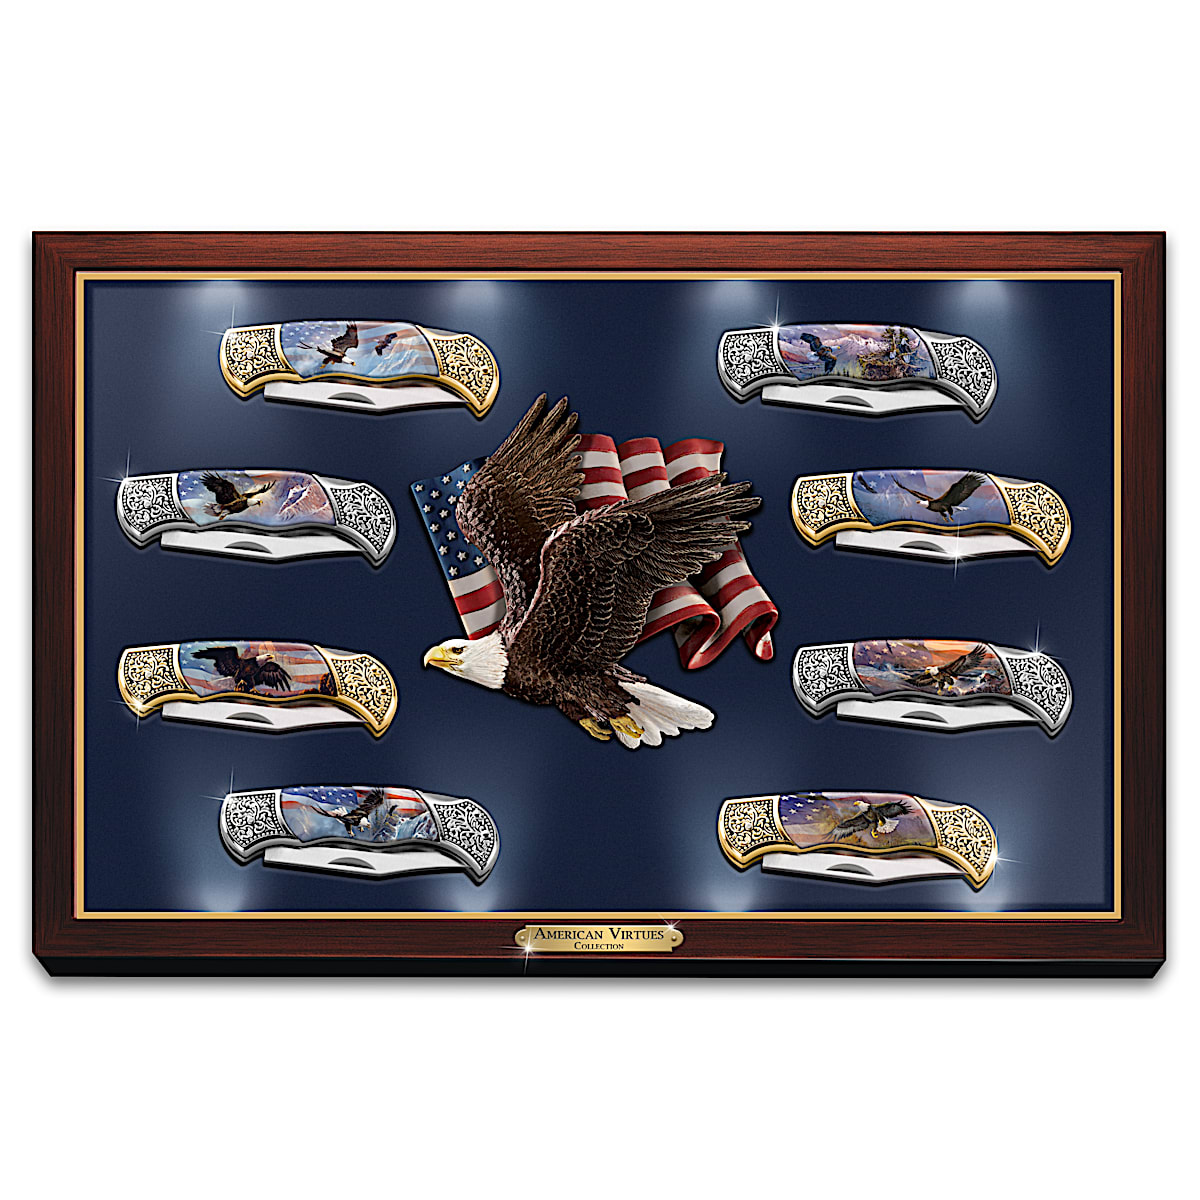 Ted Blaylock American Virtues Precision-Crafted Folding Knife Collection